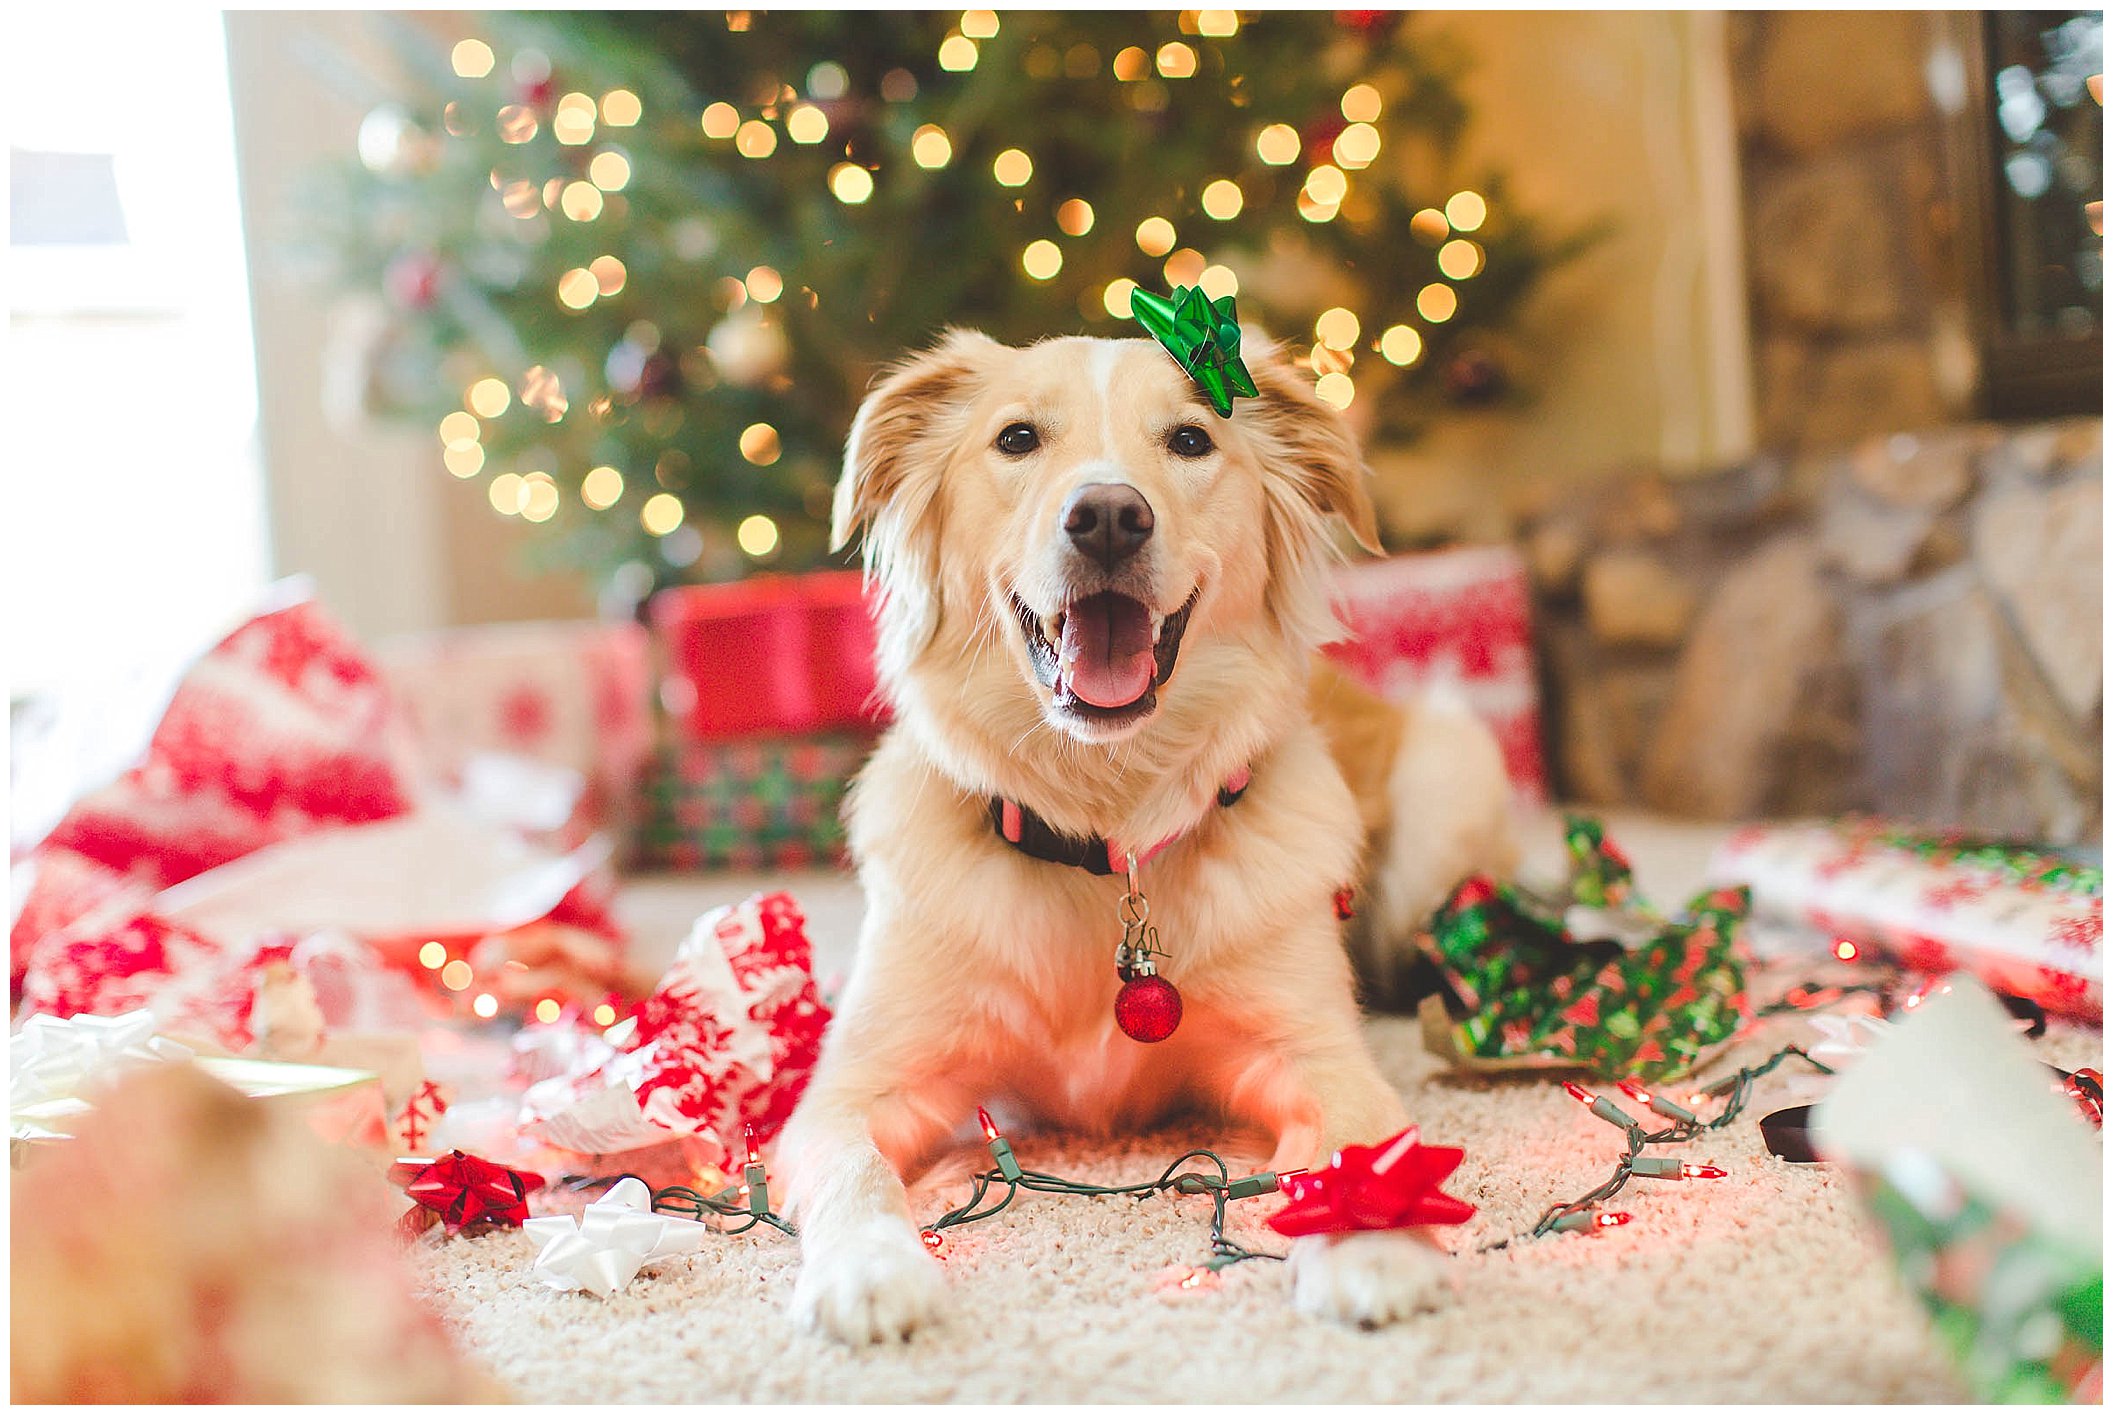 Adorable Puppy Christmas Photos, Wrapped up in lights Christmas photos_0005.jpg